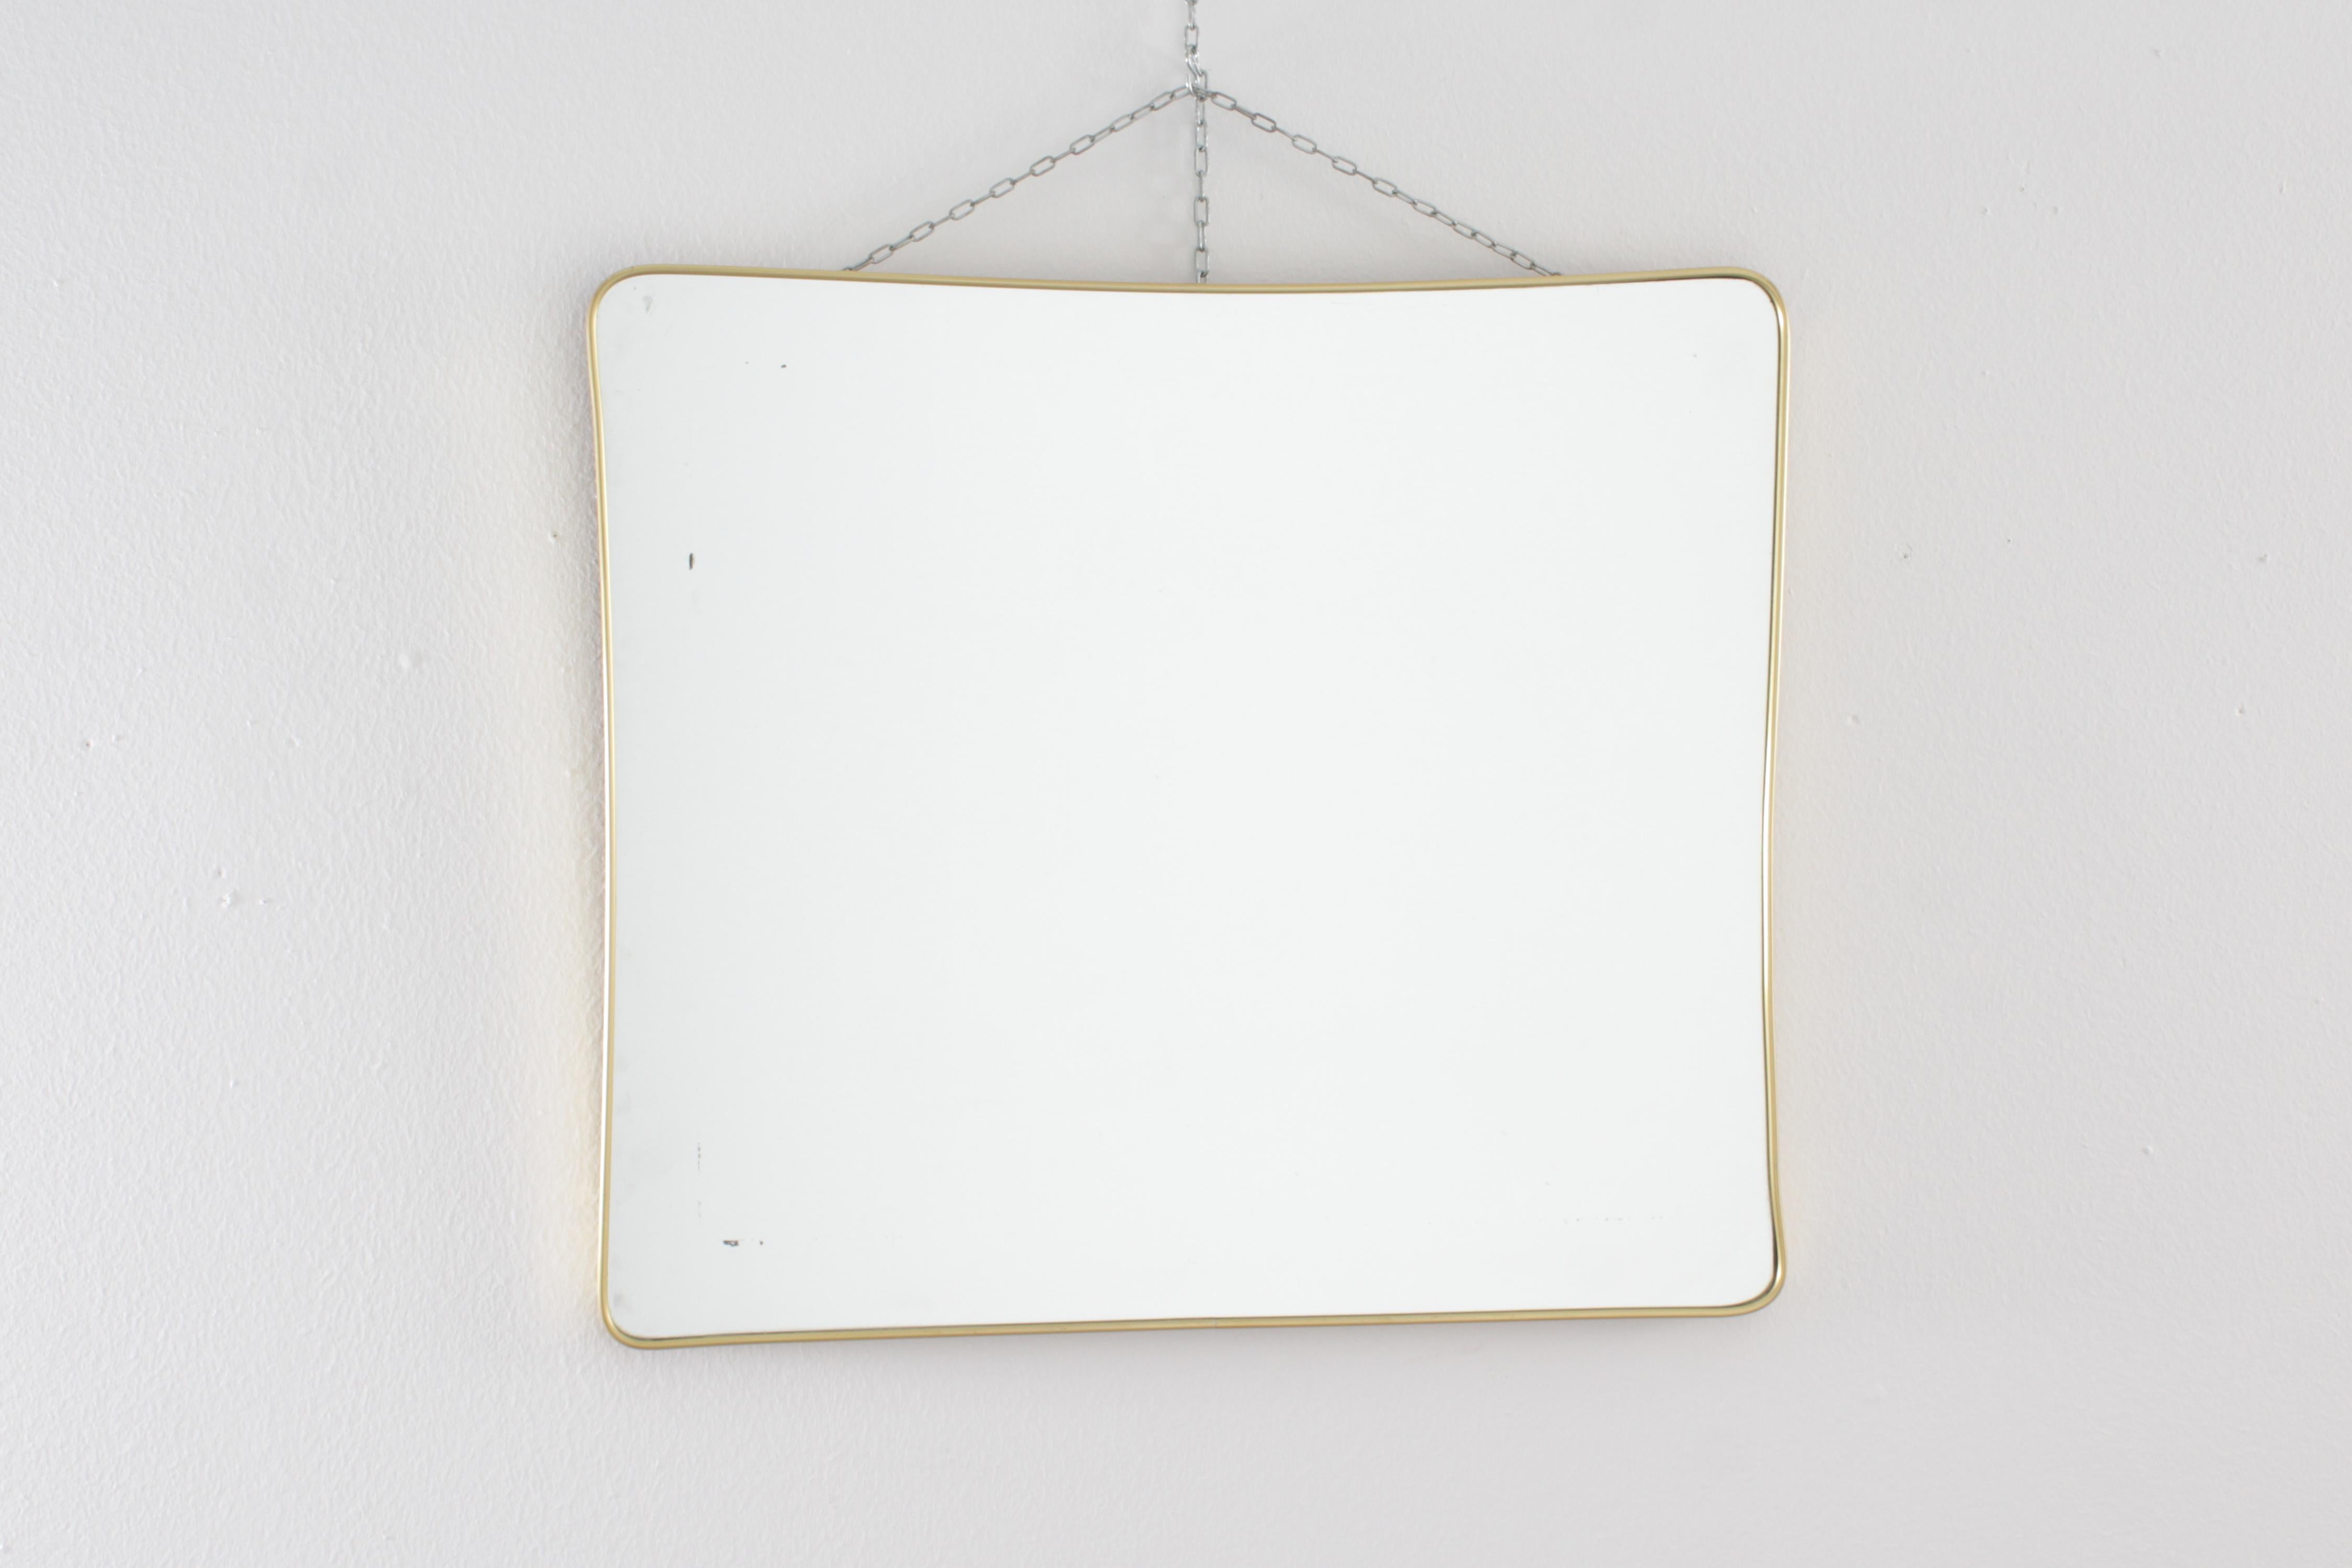 Beautiful rectangular wall mirror with rounded corners, with a narrow frame in golden aluminum. Italian production from the 1950s.
Wear consistent with age and use.